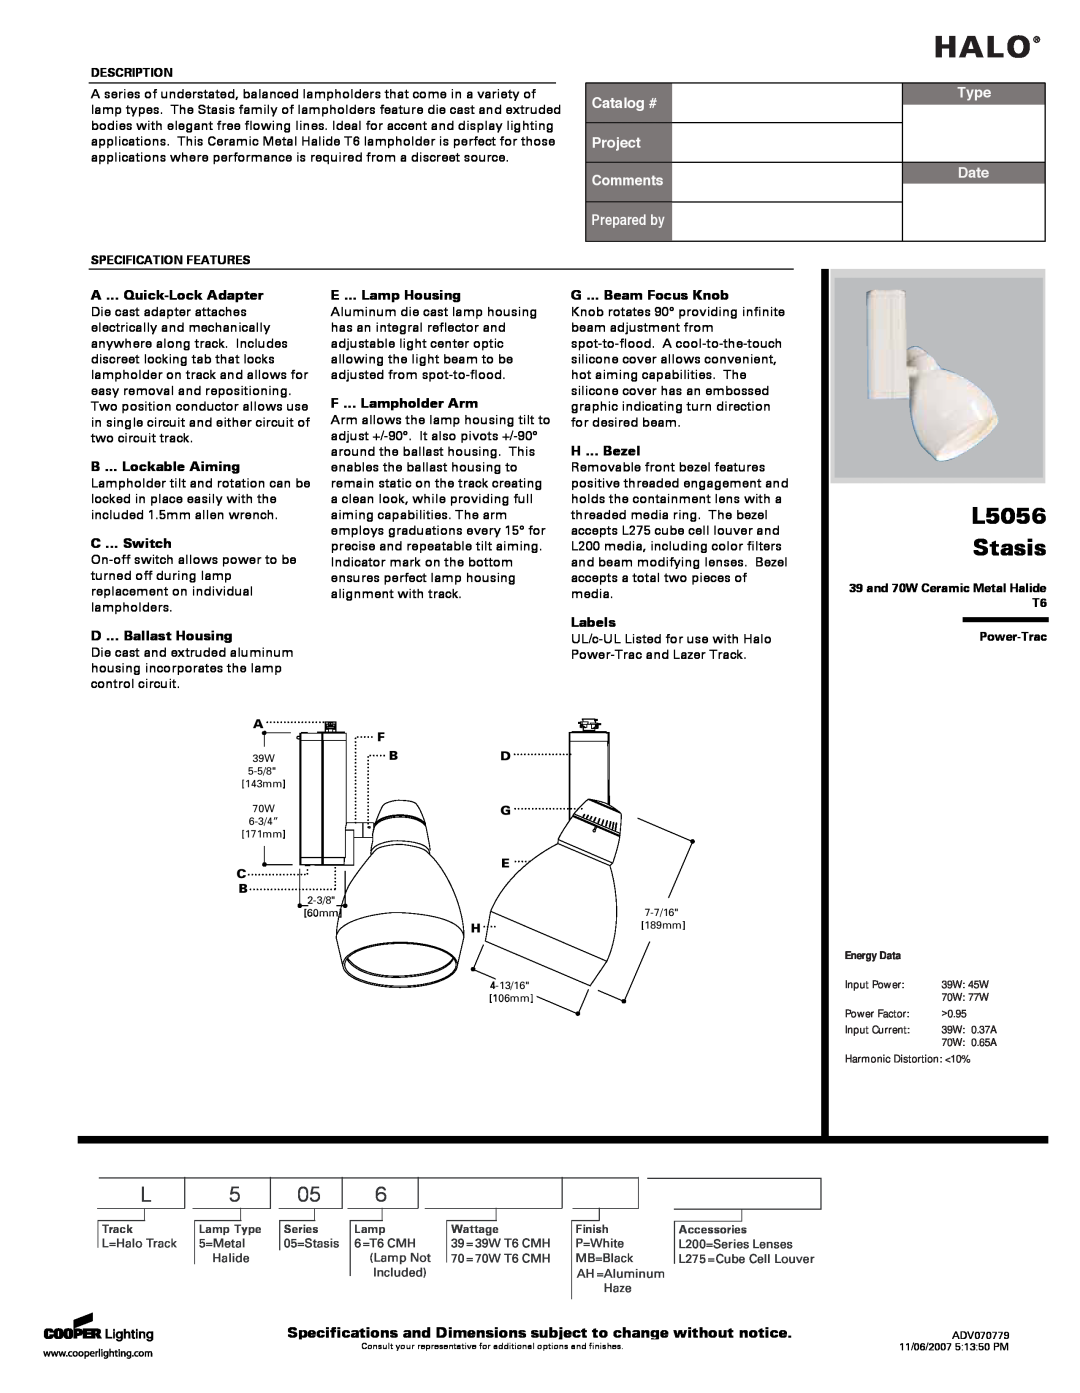 Cooper Lighting L5056 Stasis specifications Halo, Catalog #, Project Comments, Prepared by, Type, Date, C ... Switch 